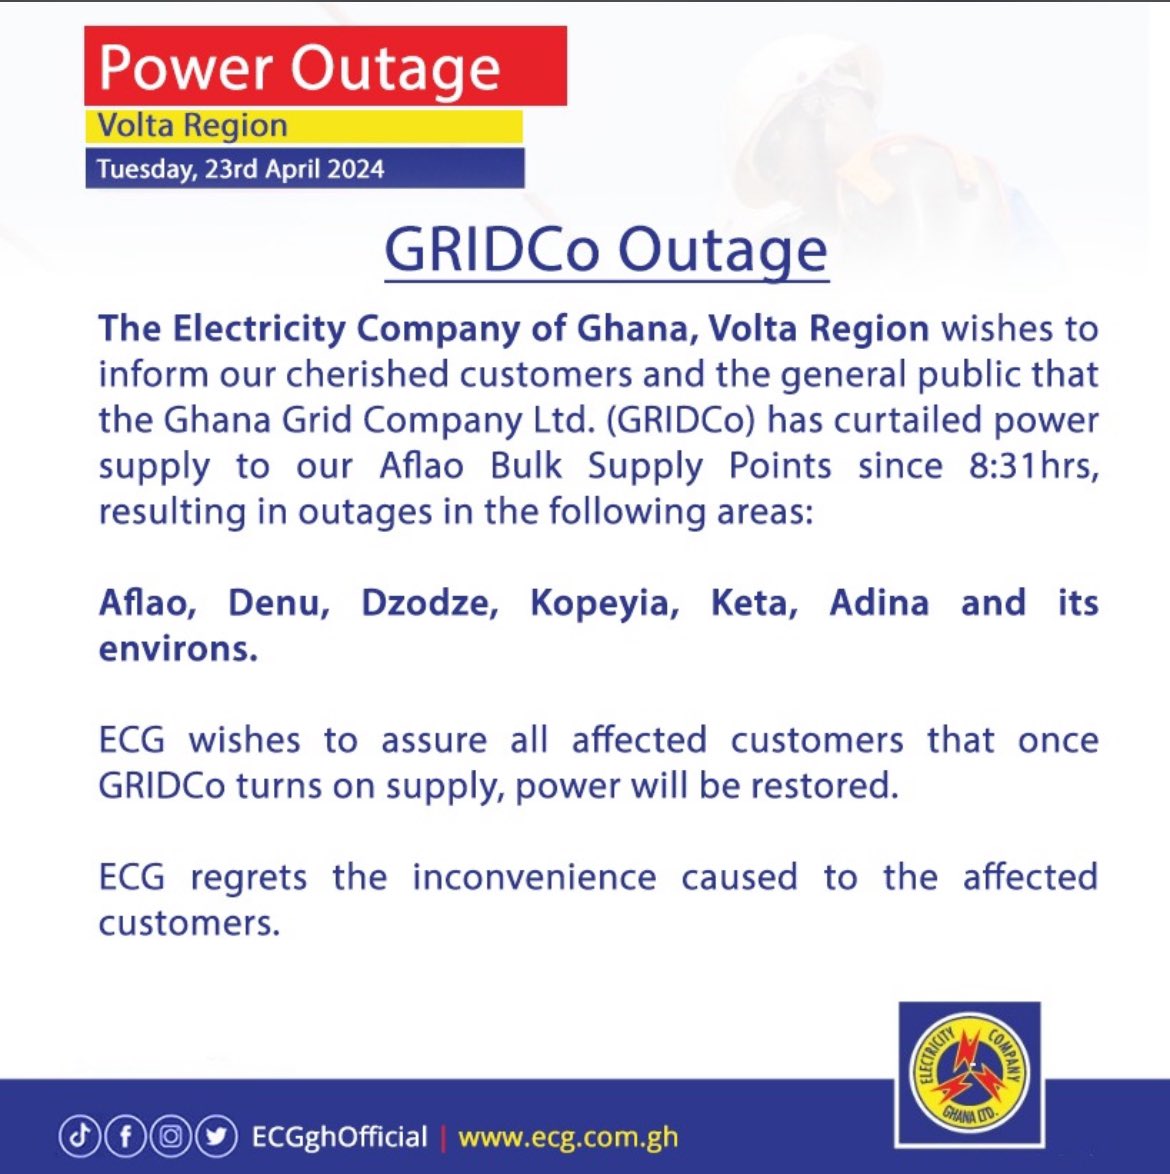 I find it more than insulting when this government tells us our lights going off are due to “localized faults”. GRIDCo cuts supply to an entire BSP with no reasons stated. It is obvious power is not enough and is being rationed. This is no localized fault